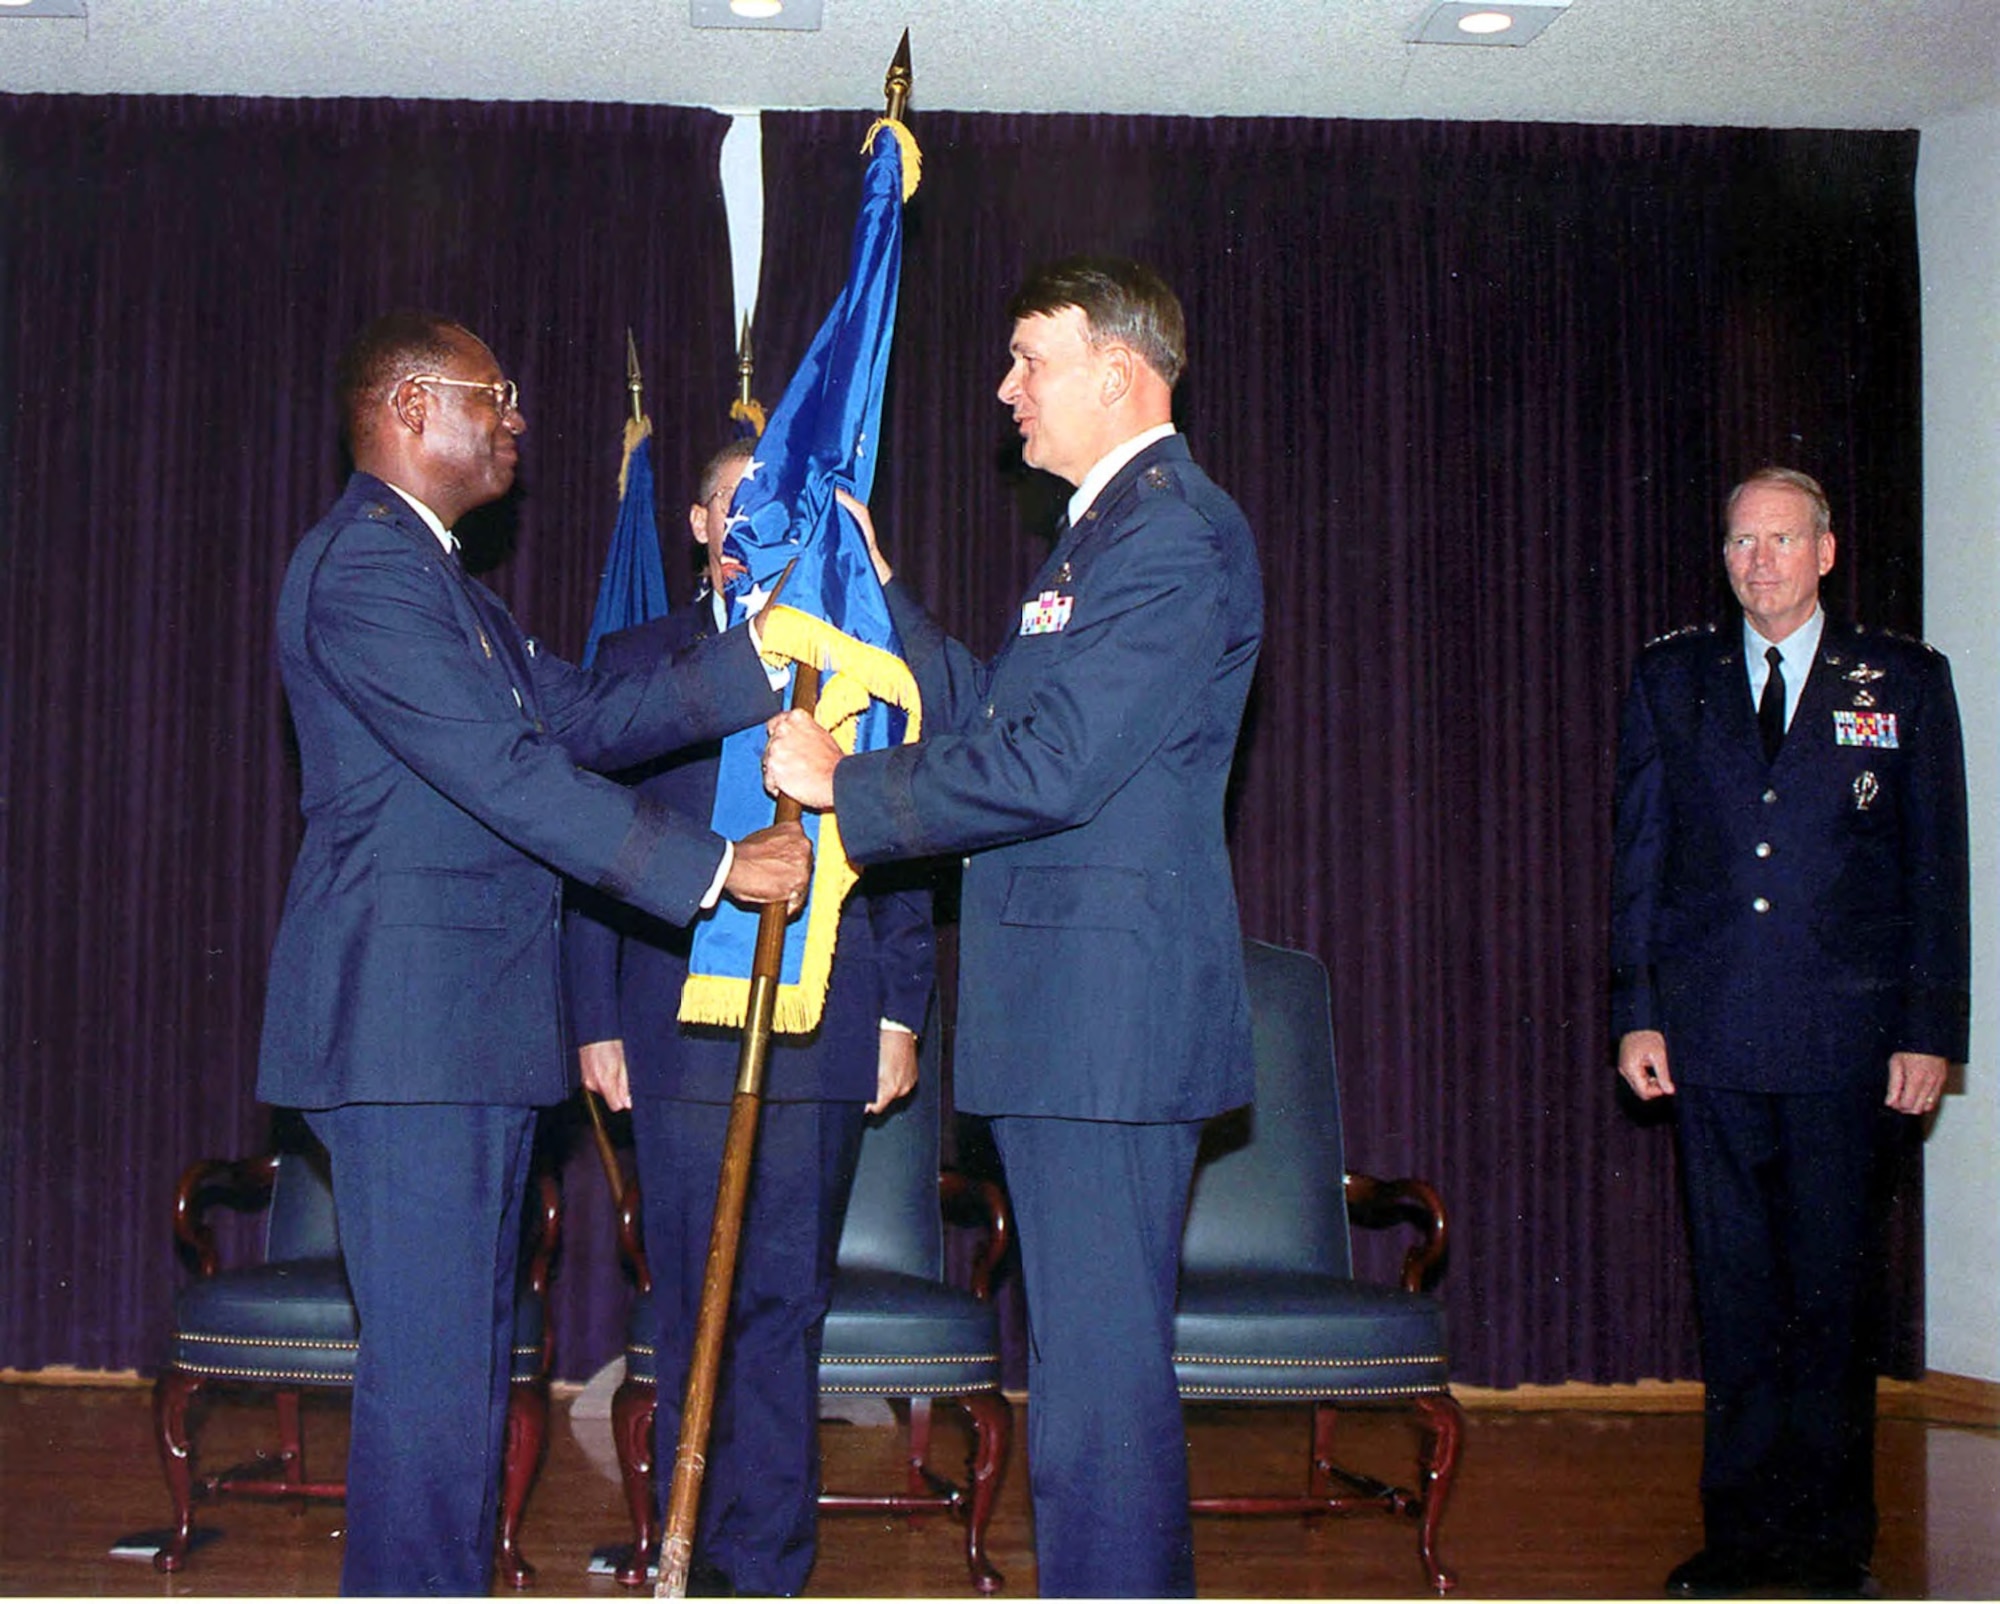 General Lester L. Lyles, commander of Air Force Materiel Command, hands SMC's flag to Lt. Gen. Roger G. DeKok, vice commander of Air Force Space Command, during ceremonies observing SMC's transfer from AFMC to AFSPC in July 1992. Lt. Gen. Brian A. Arnold, commander of SMC, stand at right. Both Lyles and DeKok were former commanders of SMC. (U.S. Air Force photo)